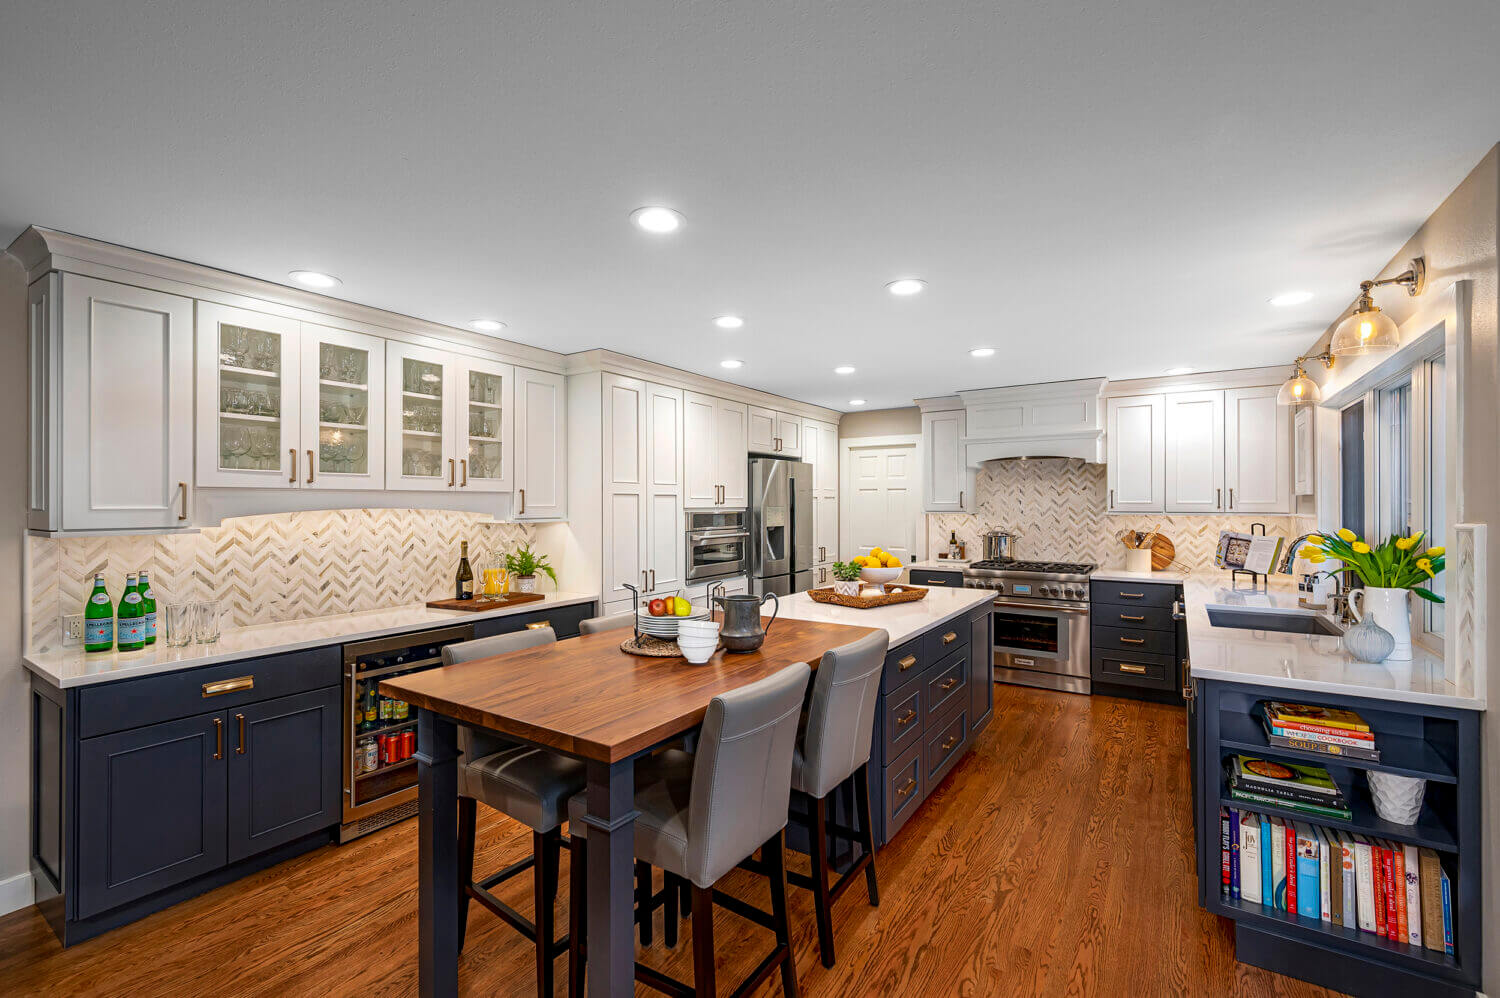 A long kitchen island that is half a workspace with cabinet storage and half casual dining room seating.